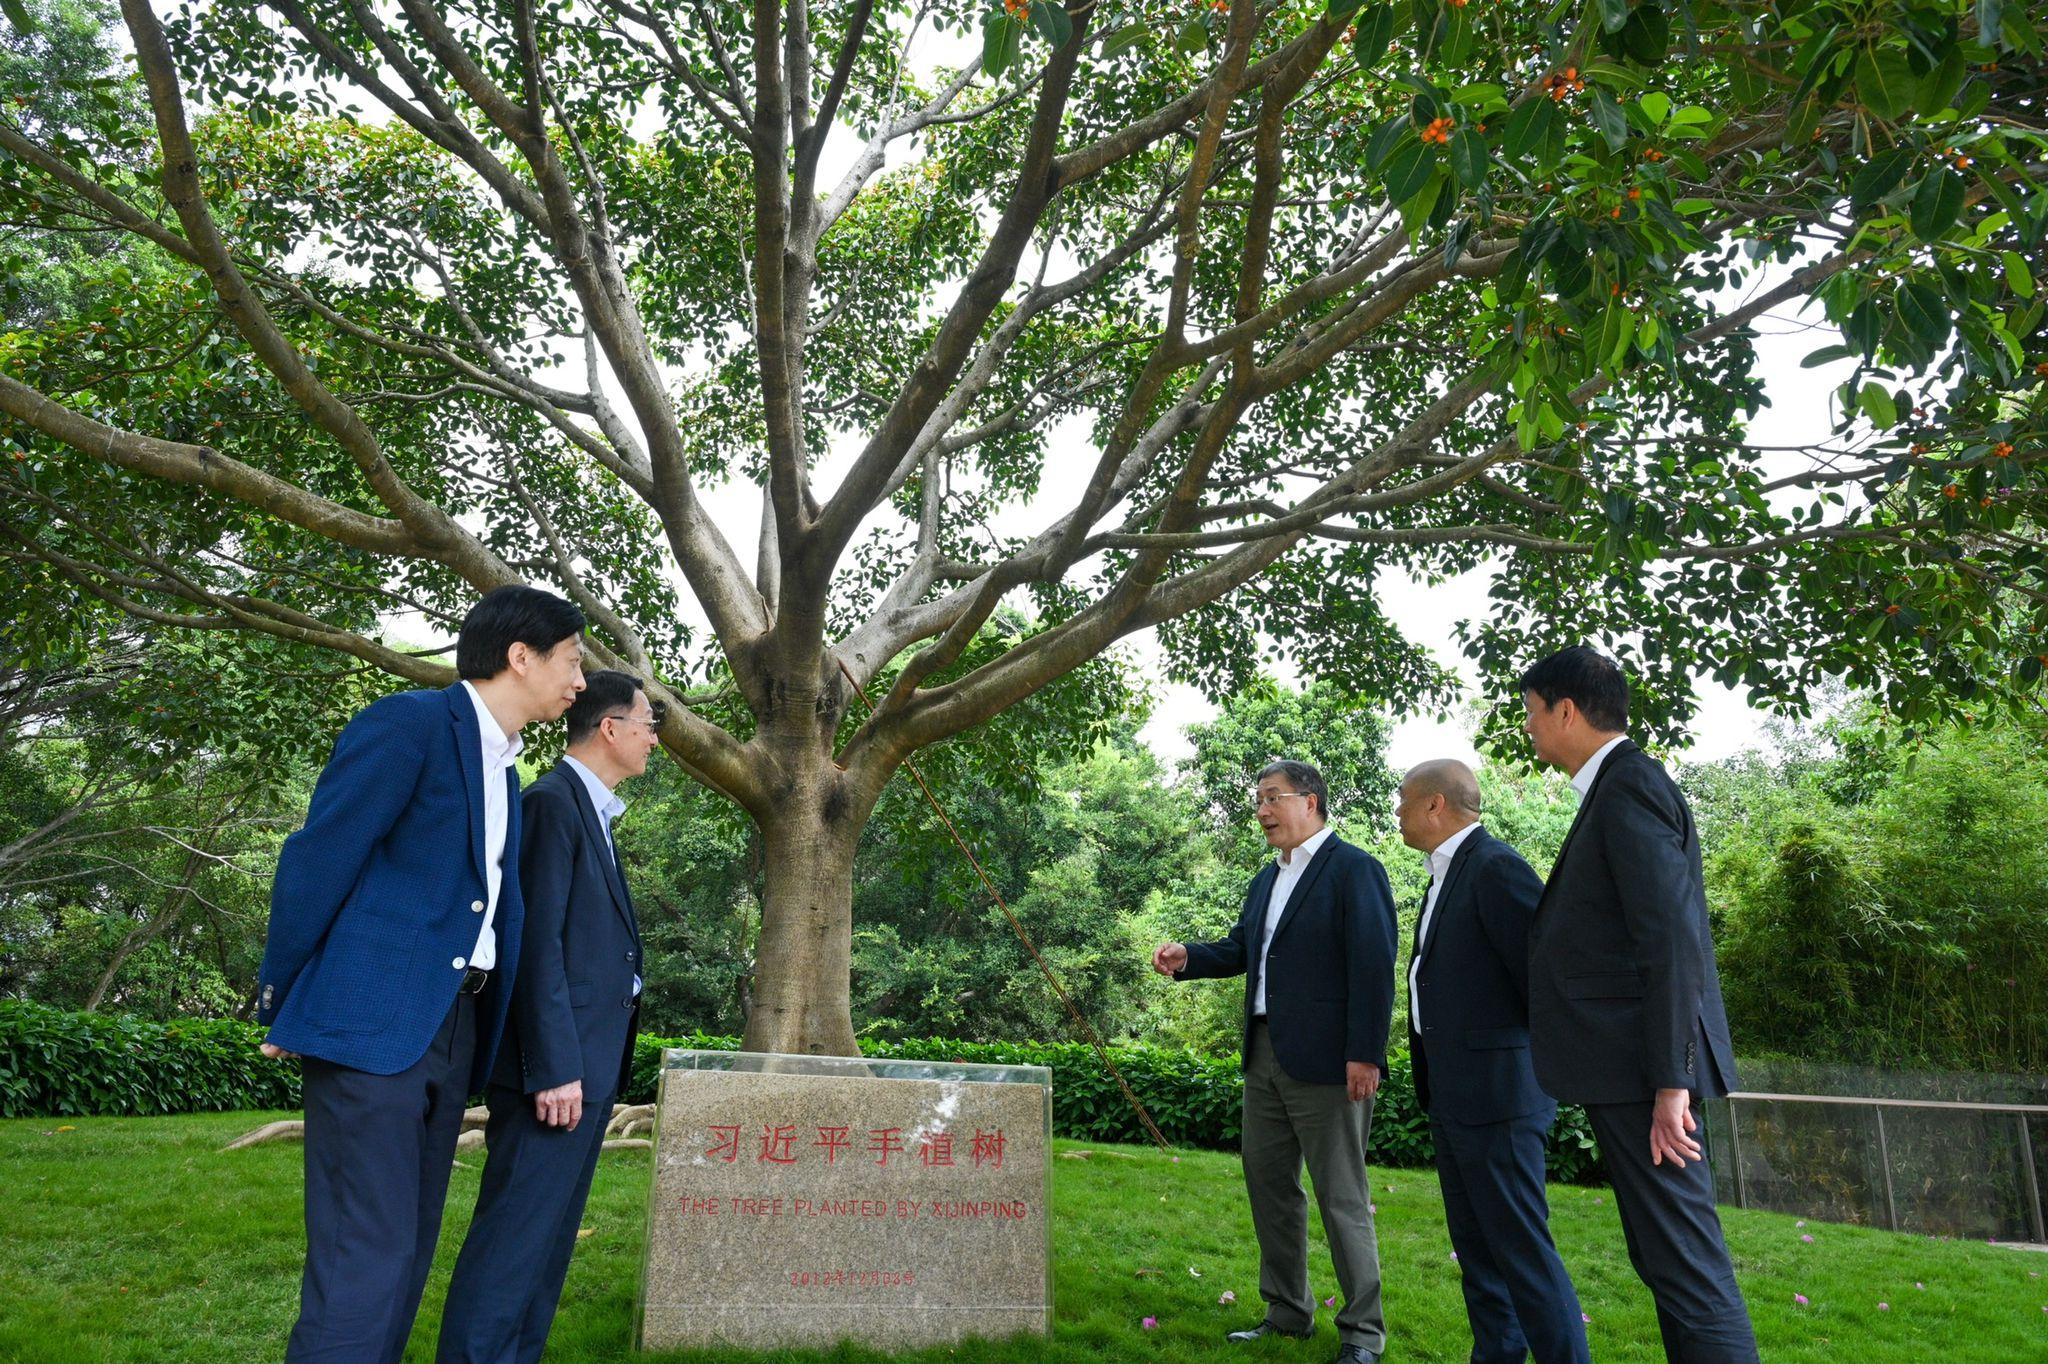 The Deputy Chief Secretary for Administration, Mr Cheuk Wing-hing (third right); the Director of Highways, Mr Jimmy Chan (first right); and the Director of Leisure and Cultural Services, Mr Vincent Liu (second left), view the tree planted by Xi Jinping at Lianhuashan Park in Shenzhen today (March 23). The Director-General of the Urban Administration and Law Enforcement Bureau of Shenzhen Municipality, Mr Zhang Guohong (second right), and Deputy Director of the Hong Kong and Macao Affairs Office of the Shenzhen Municipal People's Government Mr He Xinhong (first left) are also present to give a brief introduction.